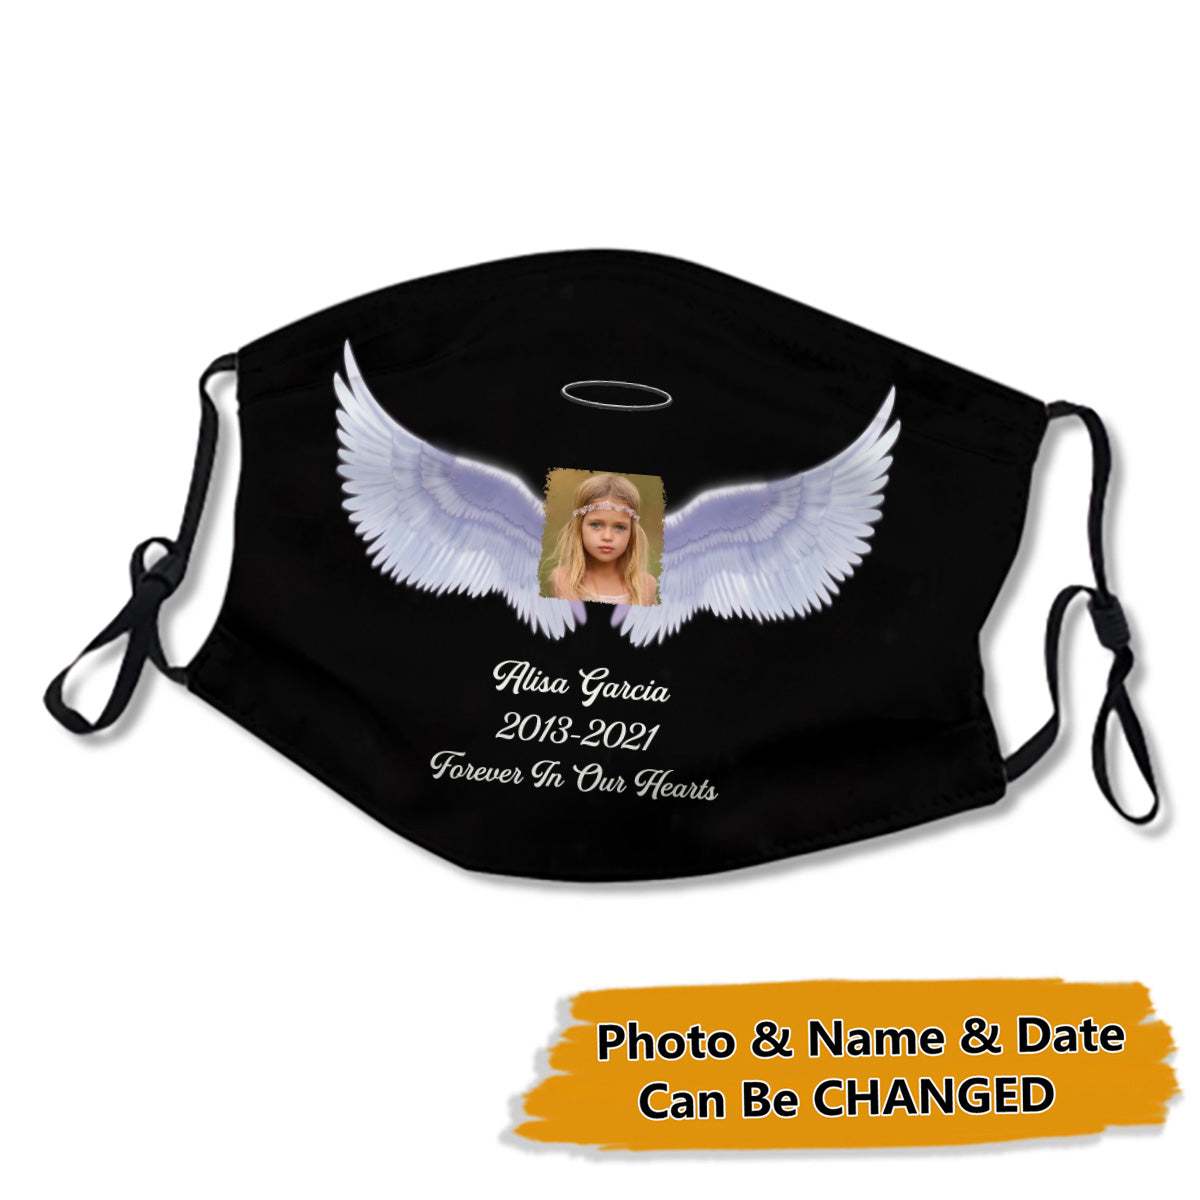 Personalized Photo and Name Memorial Cloth Face Mask No.11